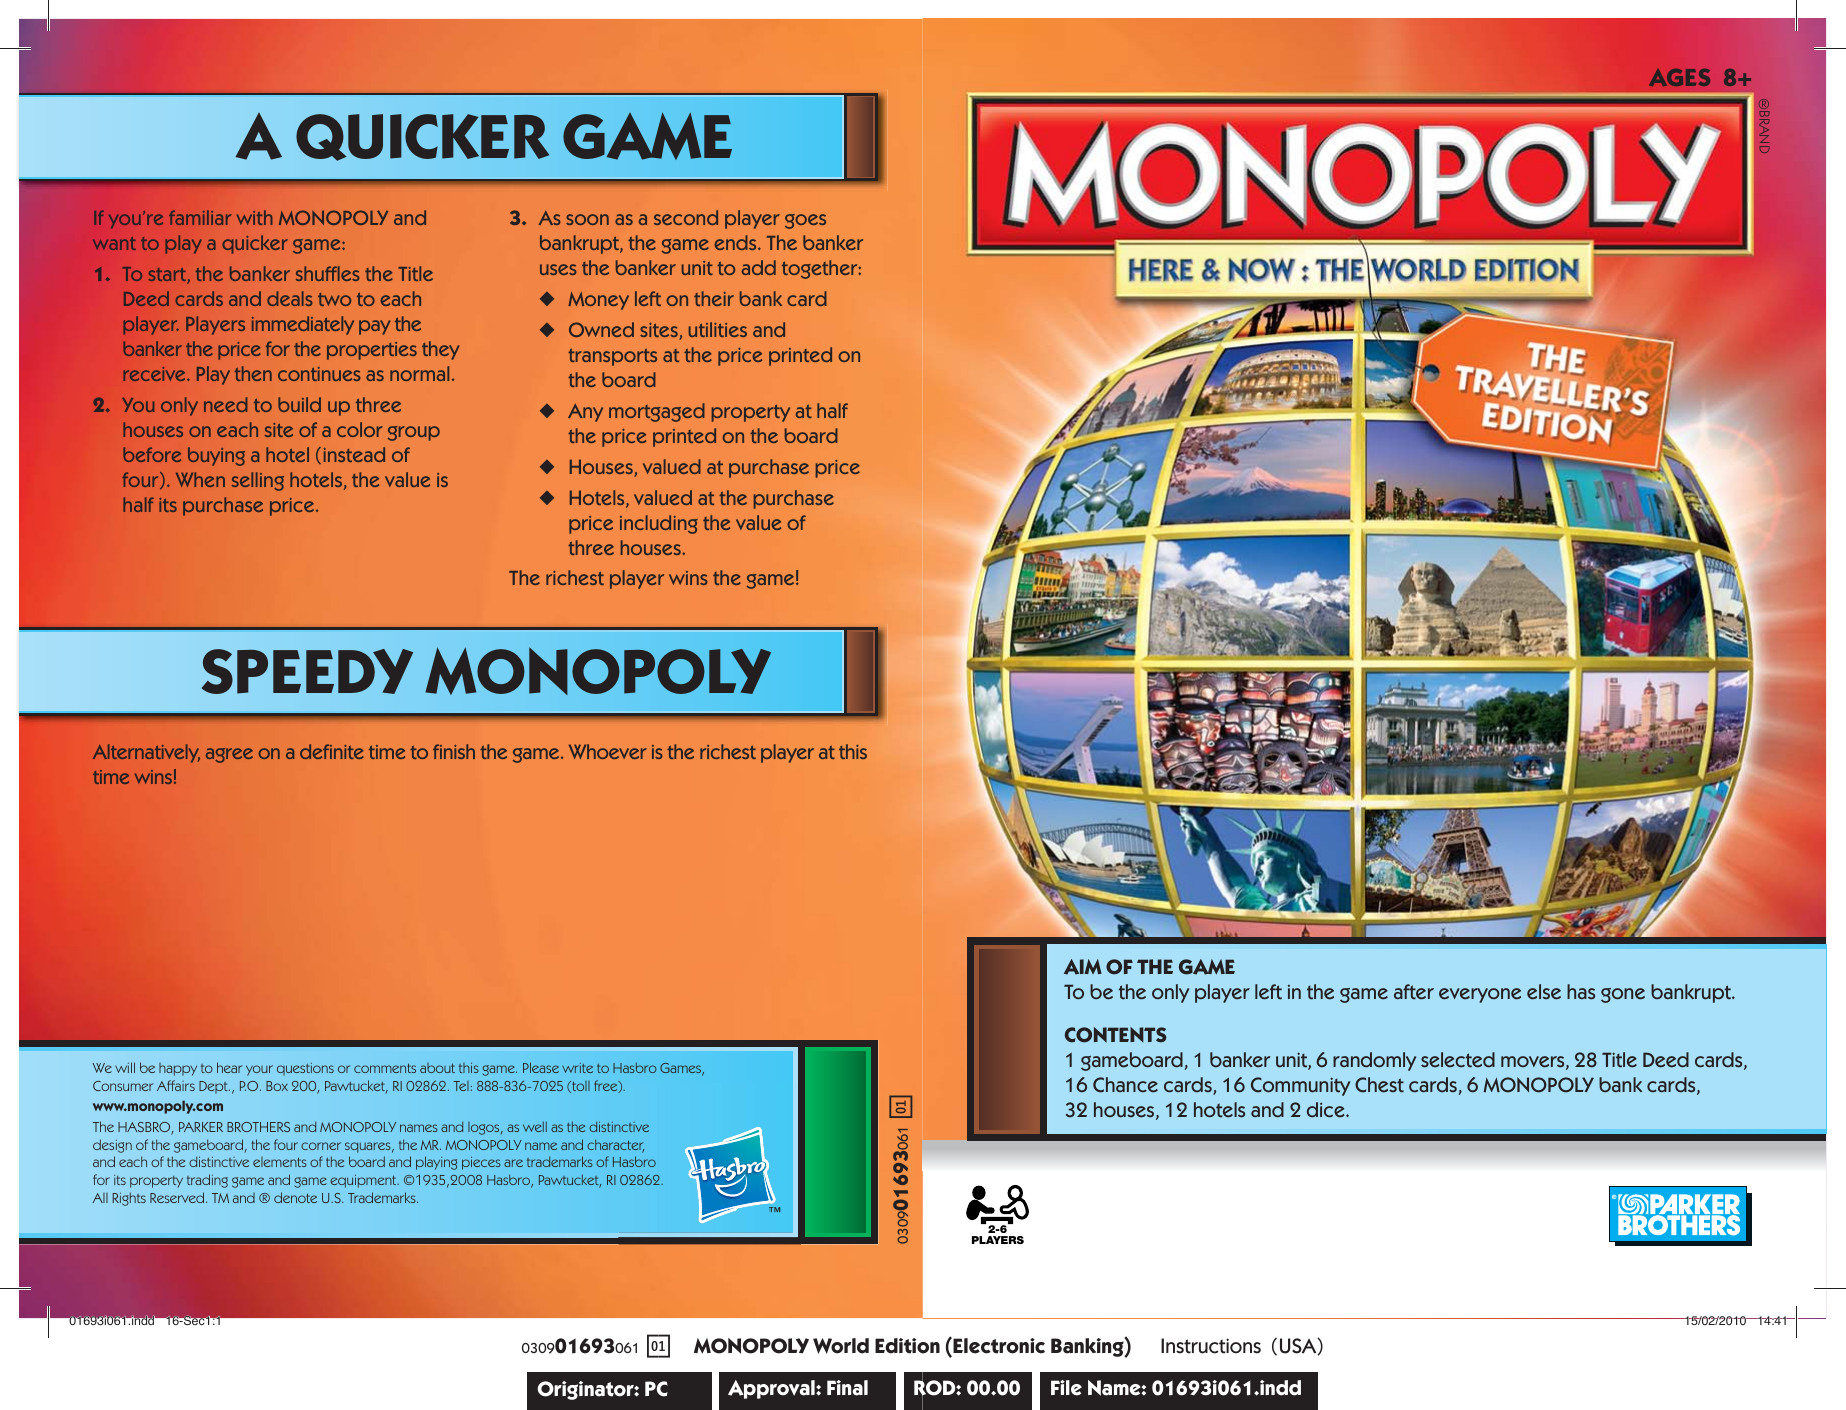 Page 1 of 8 - Hasbro Hasbro-Monopoly-Here-And-Now-The-World-Edition-030901693061Ab-Users-Manual- 01693i061  Hasbro-monopoly-here-and-now-the-world-edition-030901693061ab-users-manual